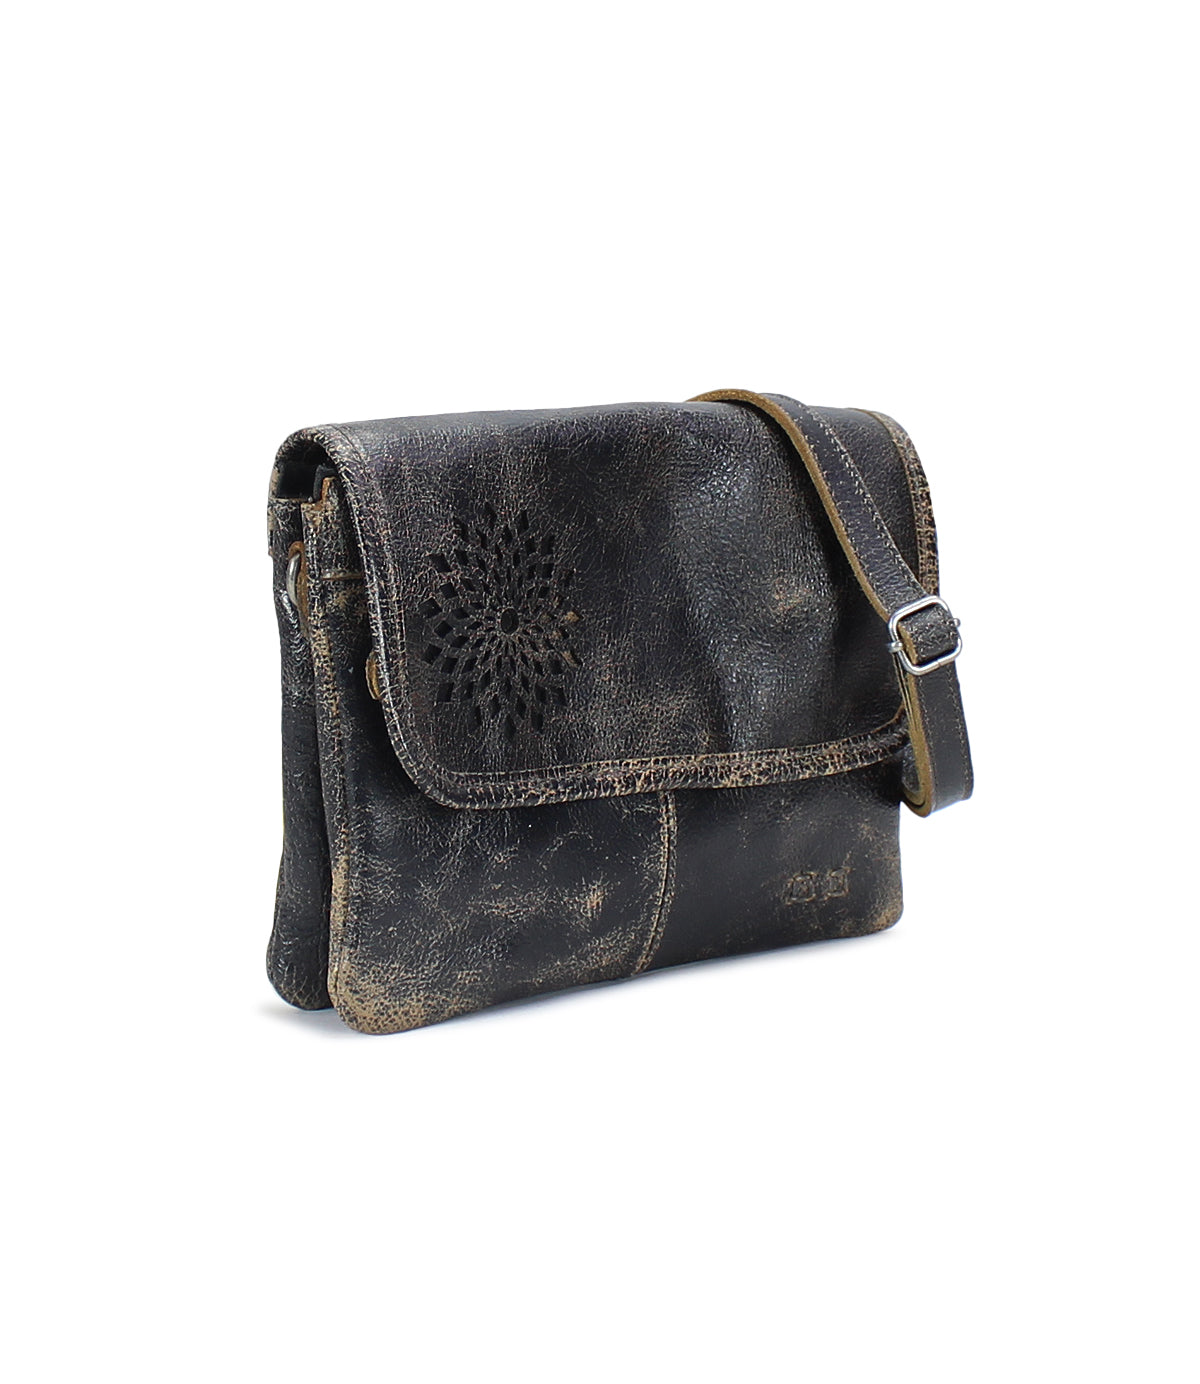 A stylish accessory, the Ziggy II by Bed Stu leather crossbody bag features a floral pattern.